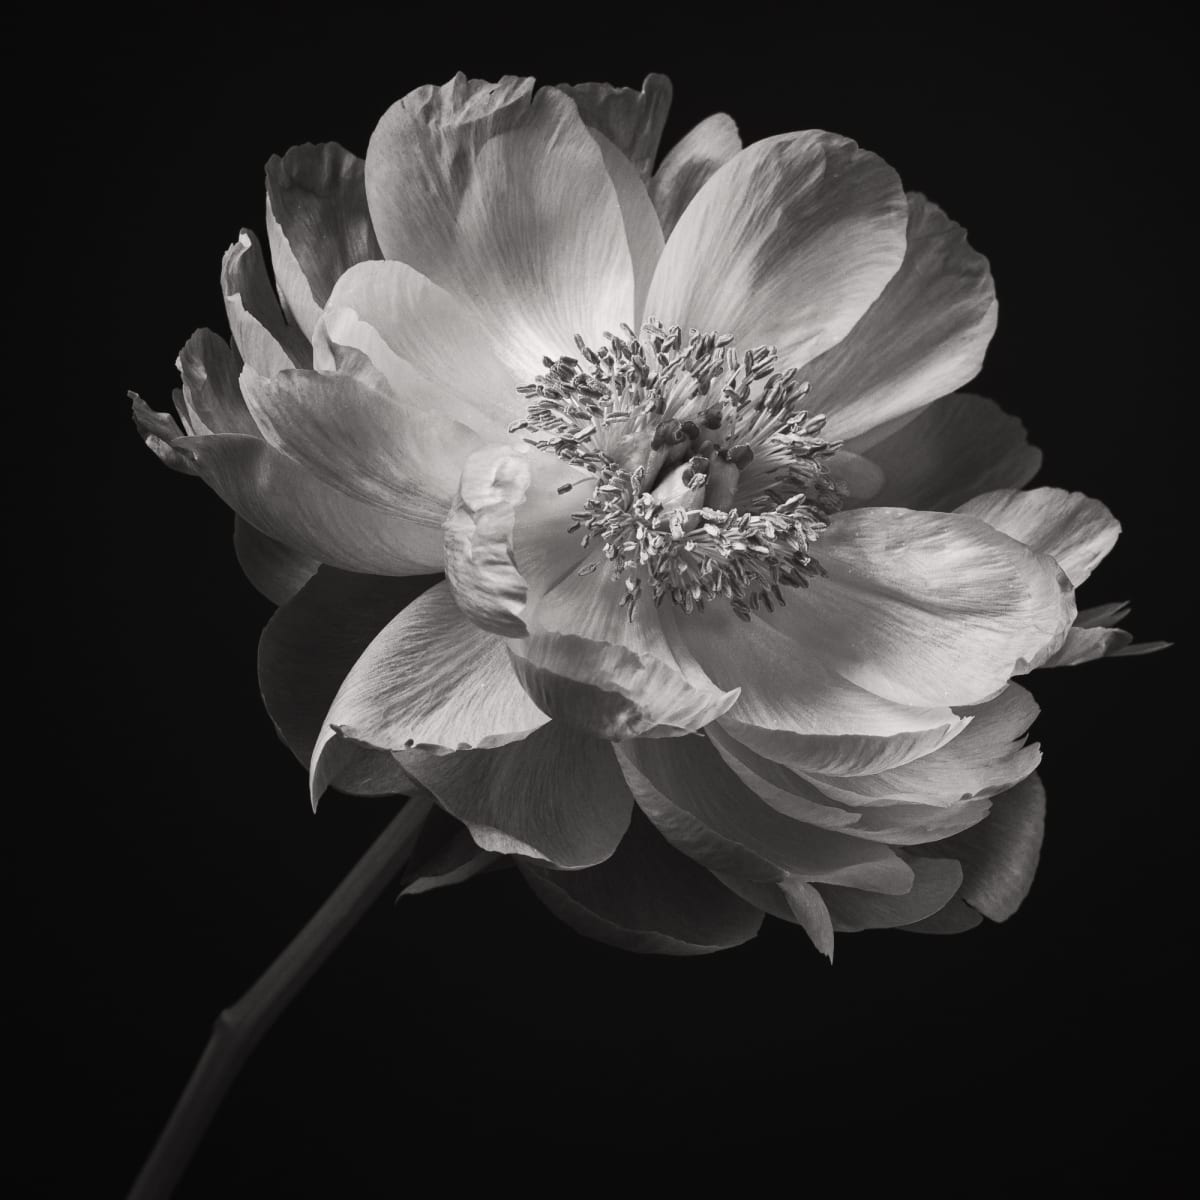 Lustrous Paeony by Sheryl's Virtual Garden  Image: This voluptuous peony blossom has been rendered in black and white.  The range of pink hues  in the color version inspired me to consider a black and white conversion which was even more striking.  The petals are fully open, revealing the stamens.  This image is perfect for sophisticated interiors, and amazing on acrylic.